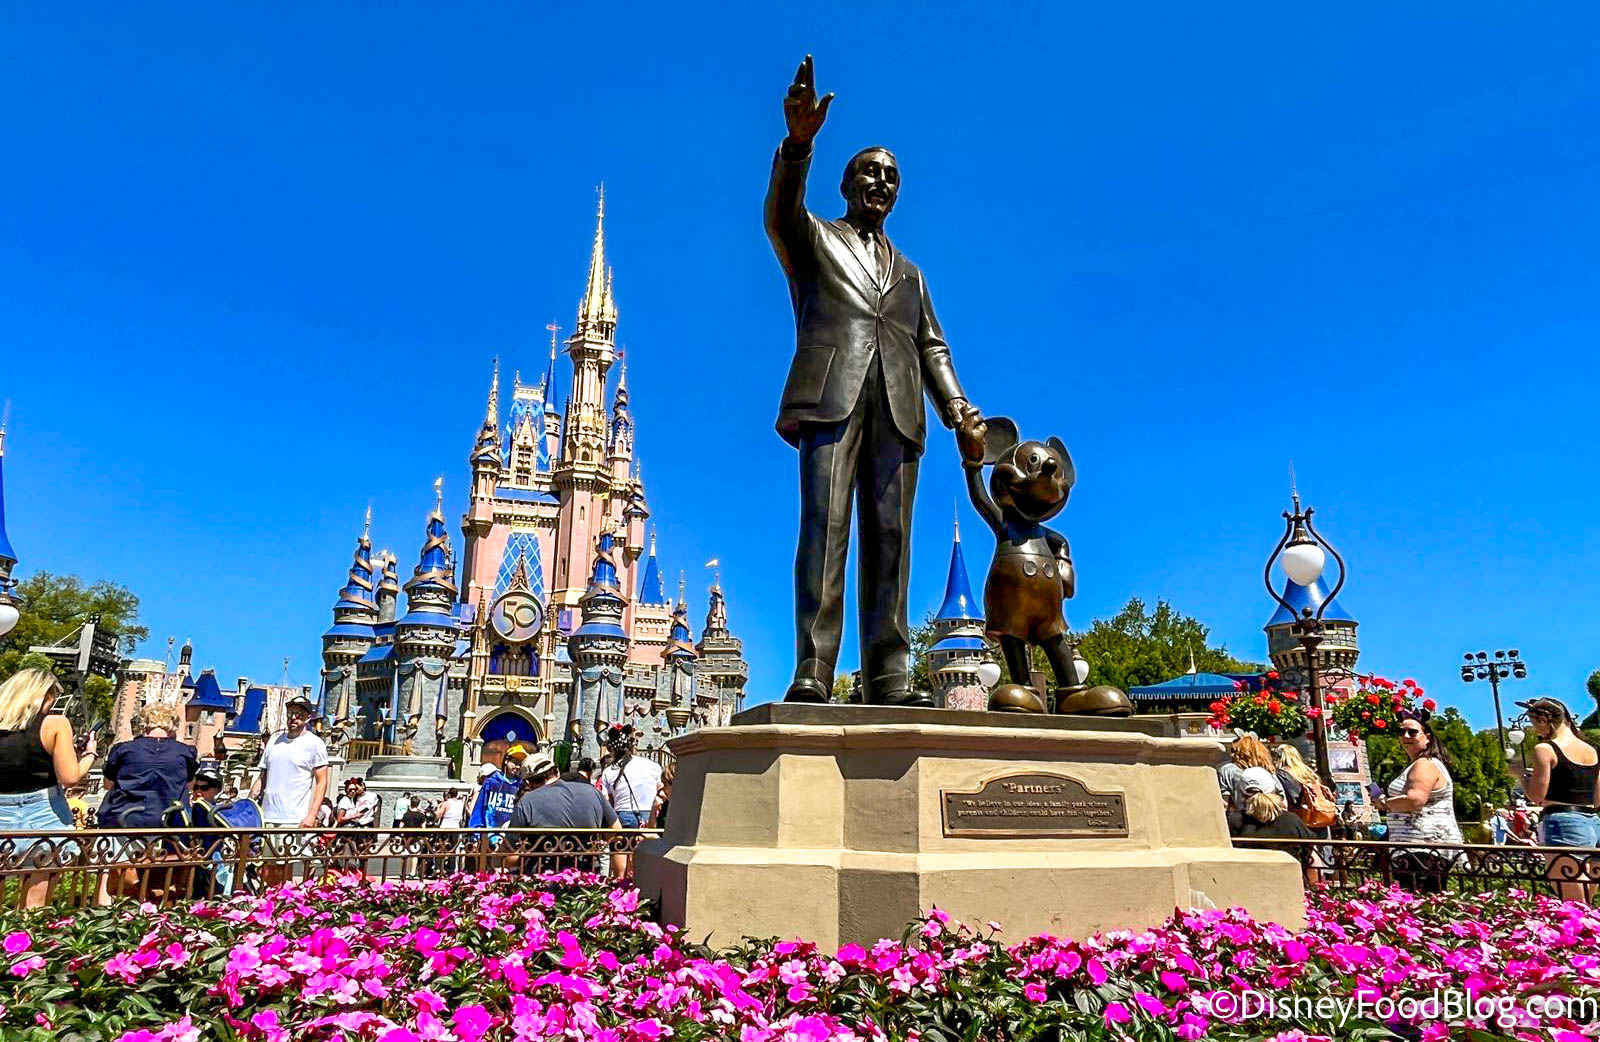 Guests Comment On If Park Passes Have Made Planning a Disney World Trip HARDER